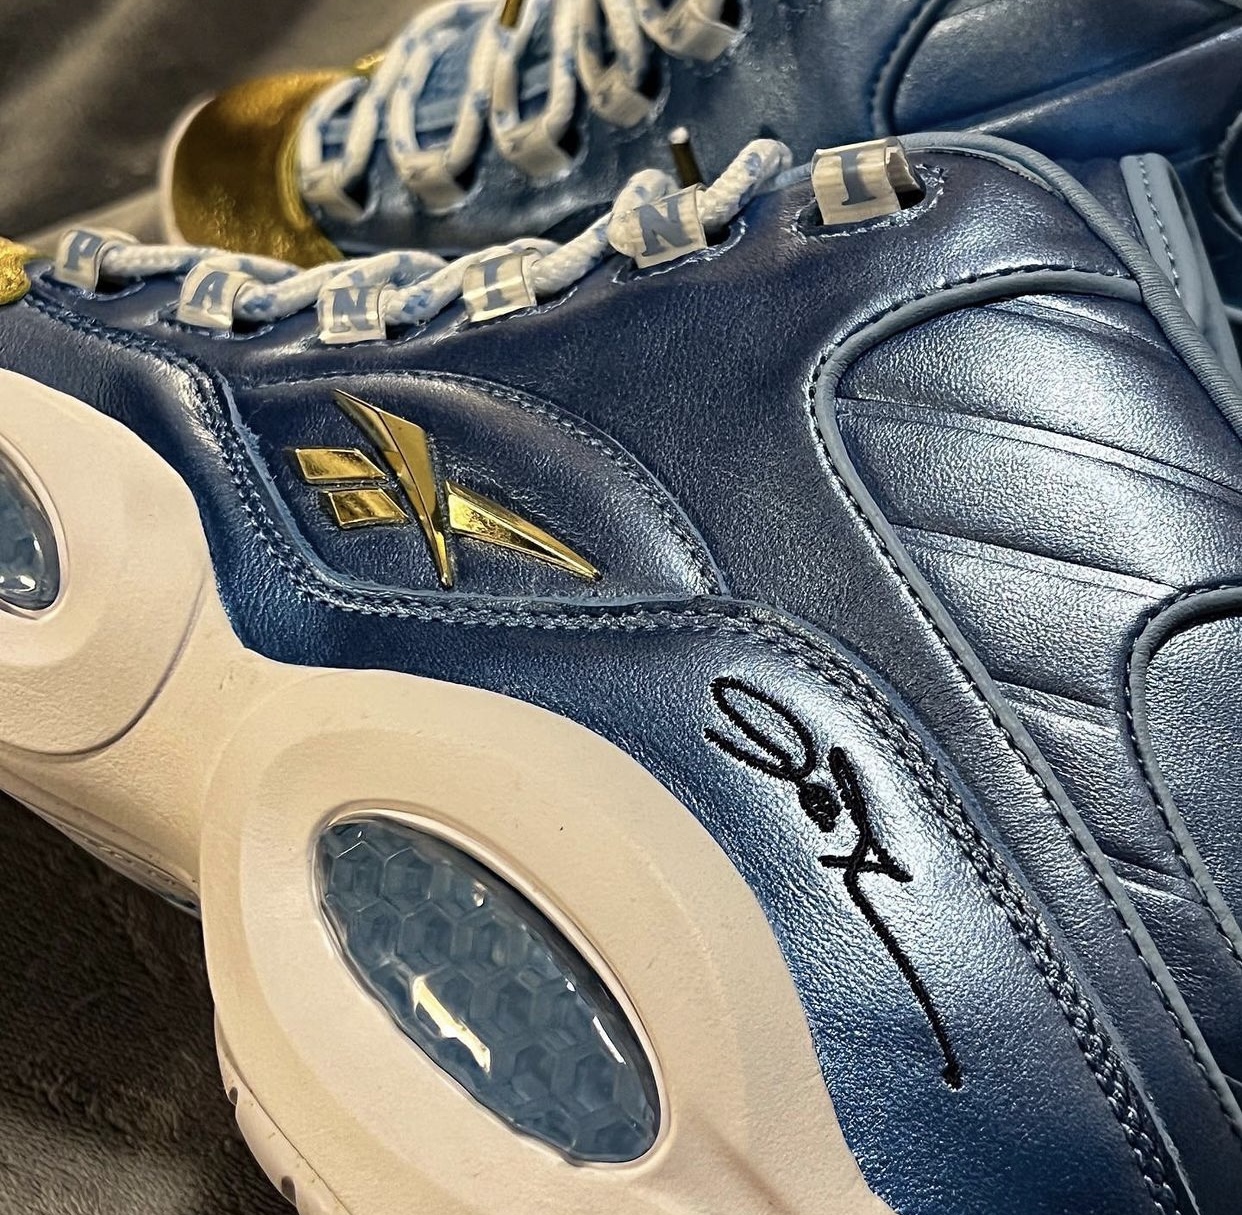 Panini Reebok Question Mid Blue Gold Friends and Family